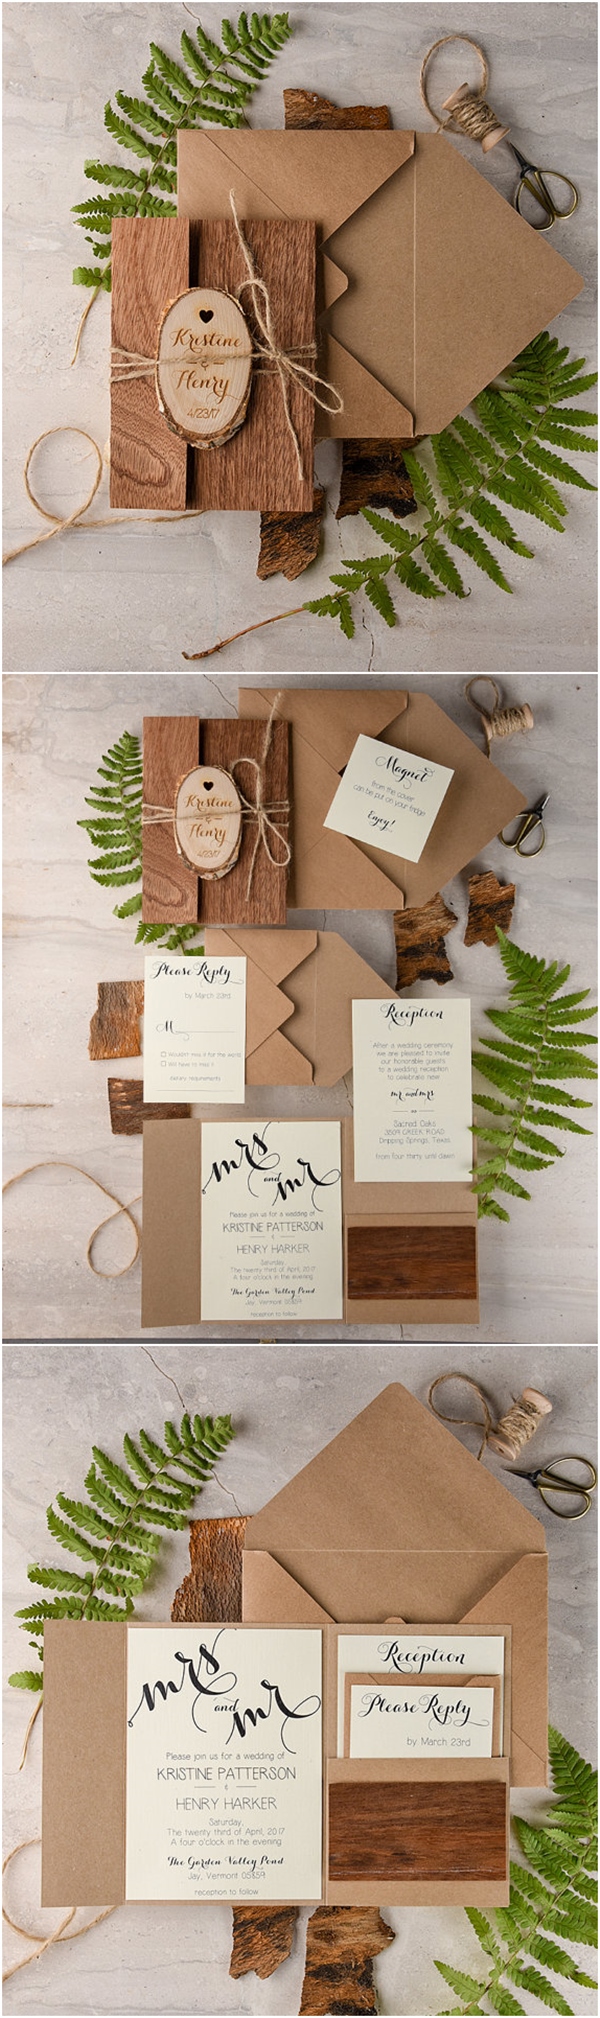 Recycled Eco Rustic Real Wood Wedding Invitations